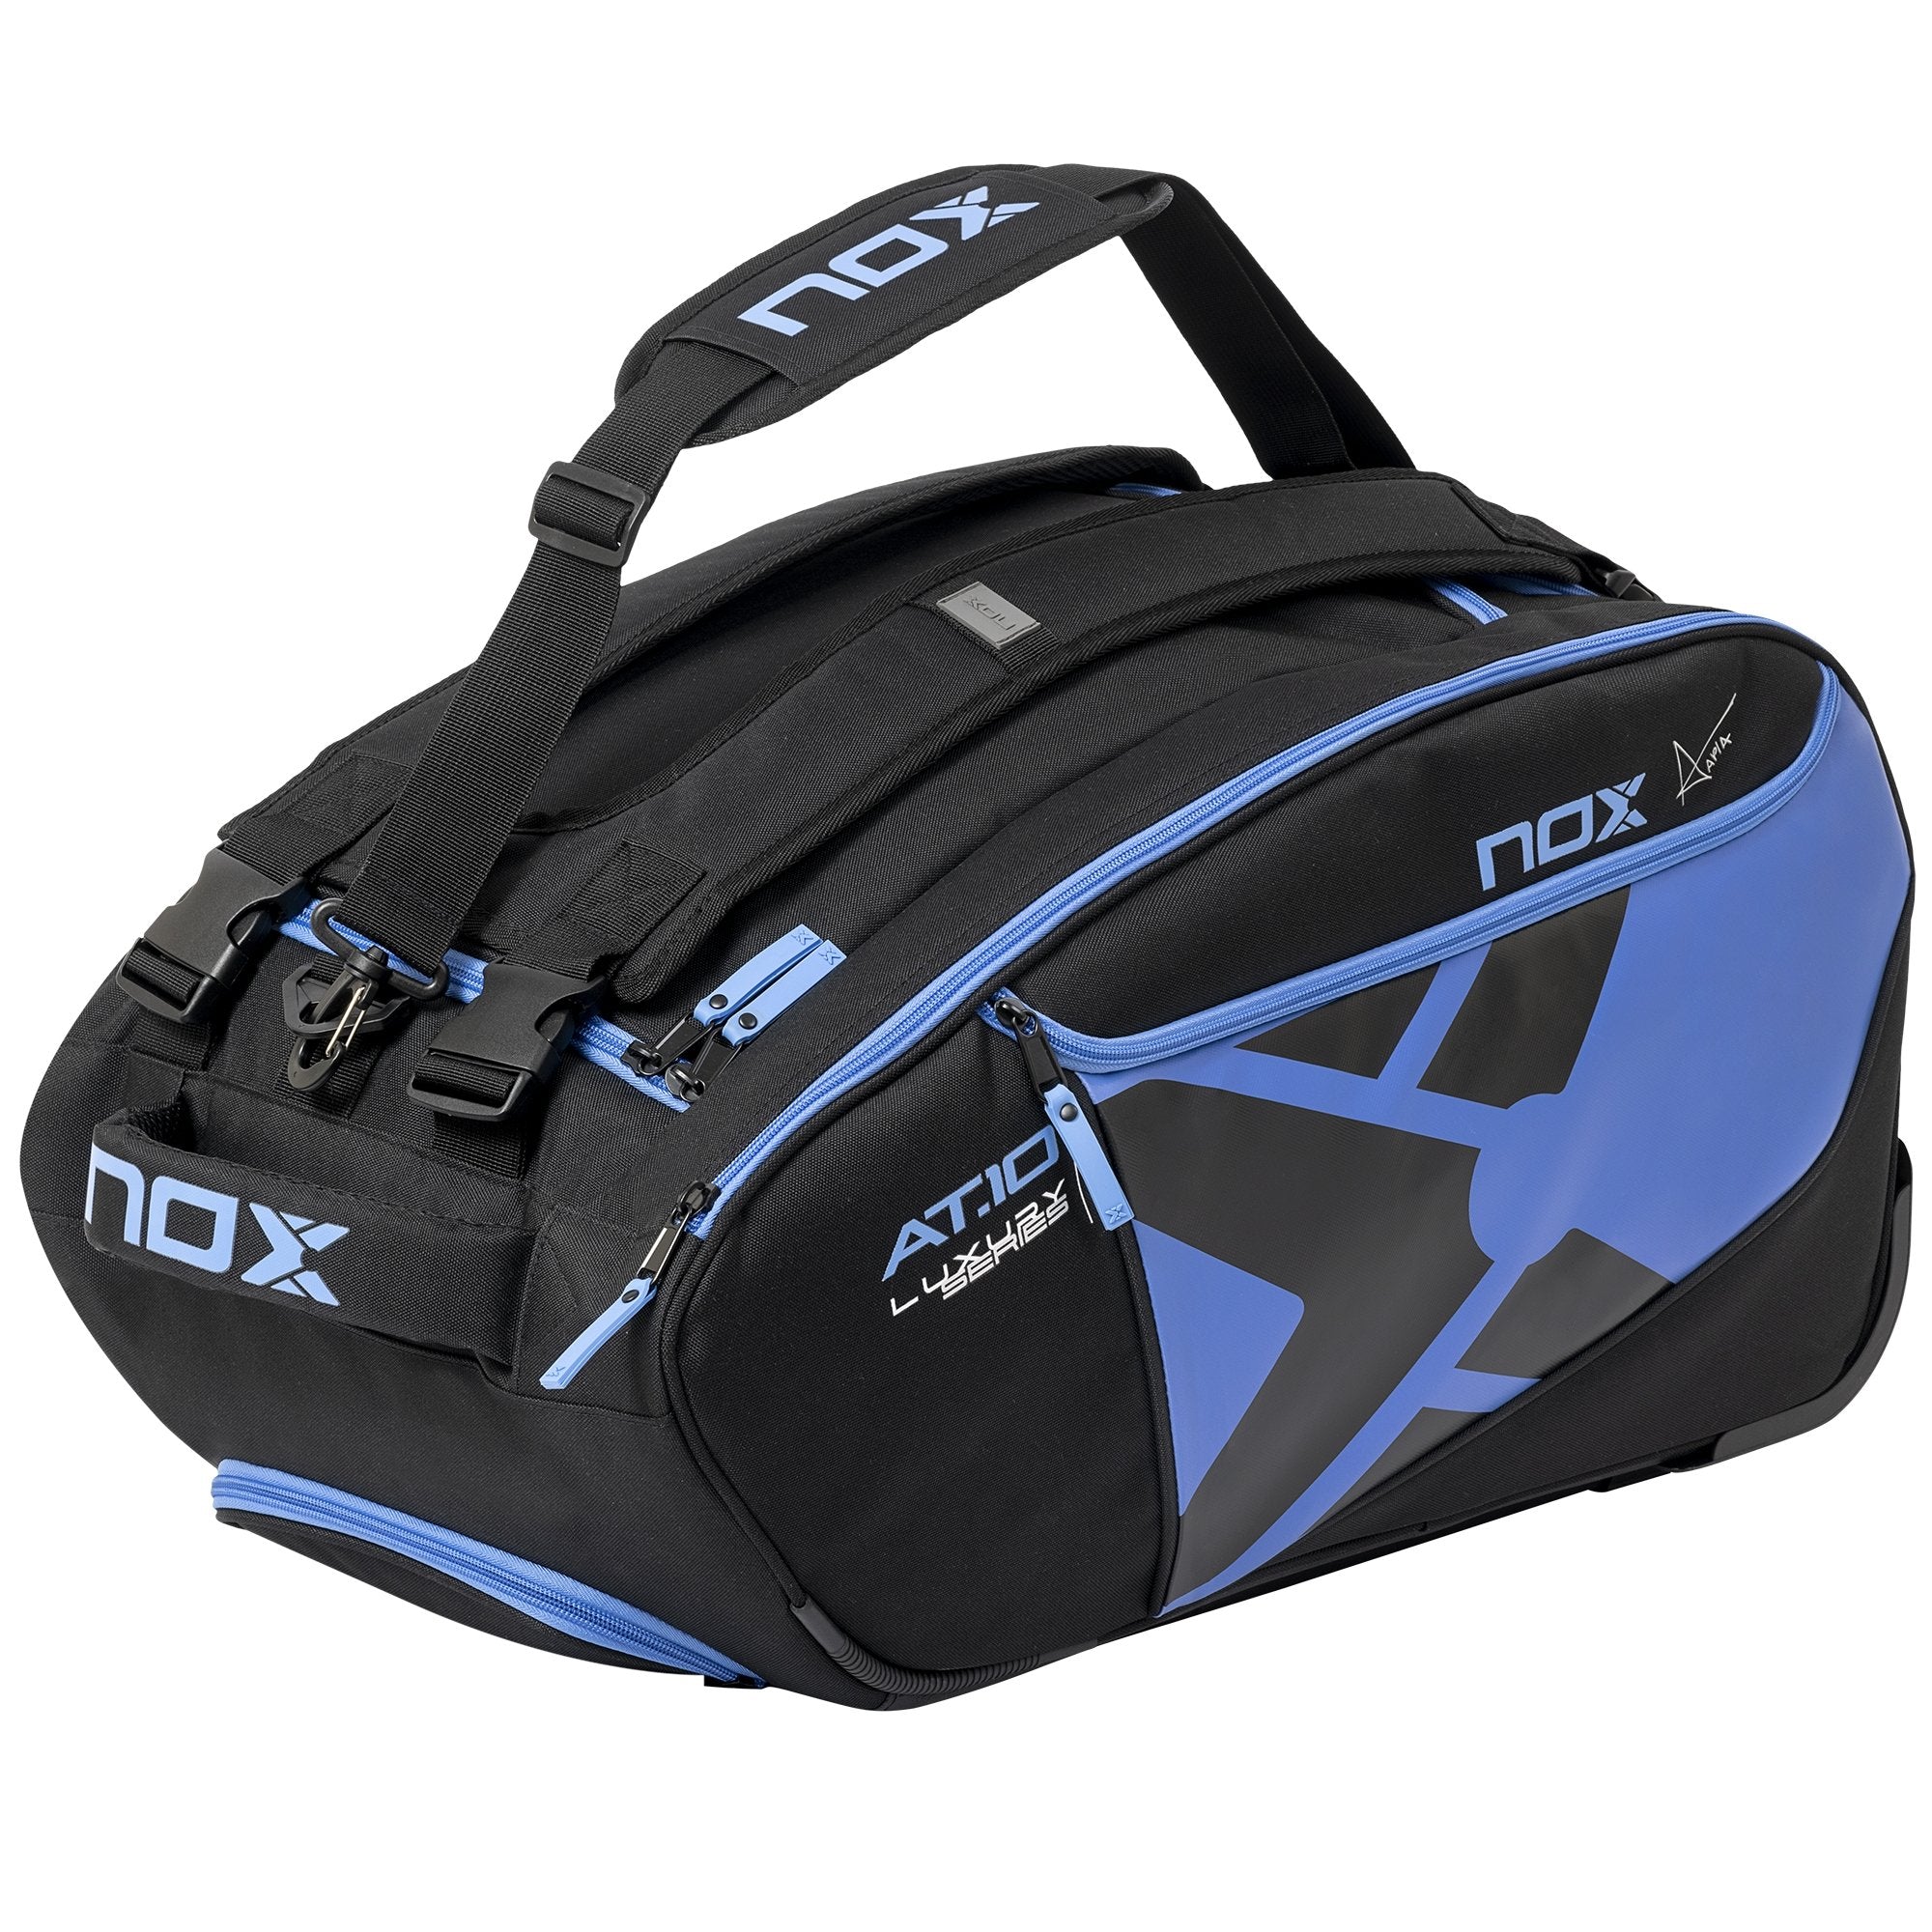 PALETERO AT10 COMPETITION TROLLEY – NOX